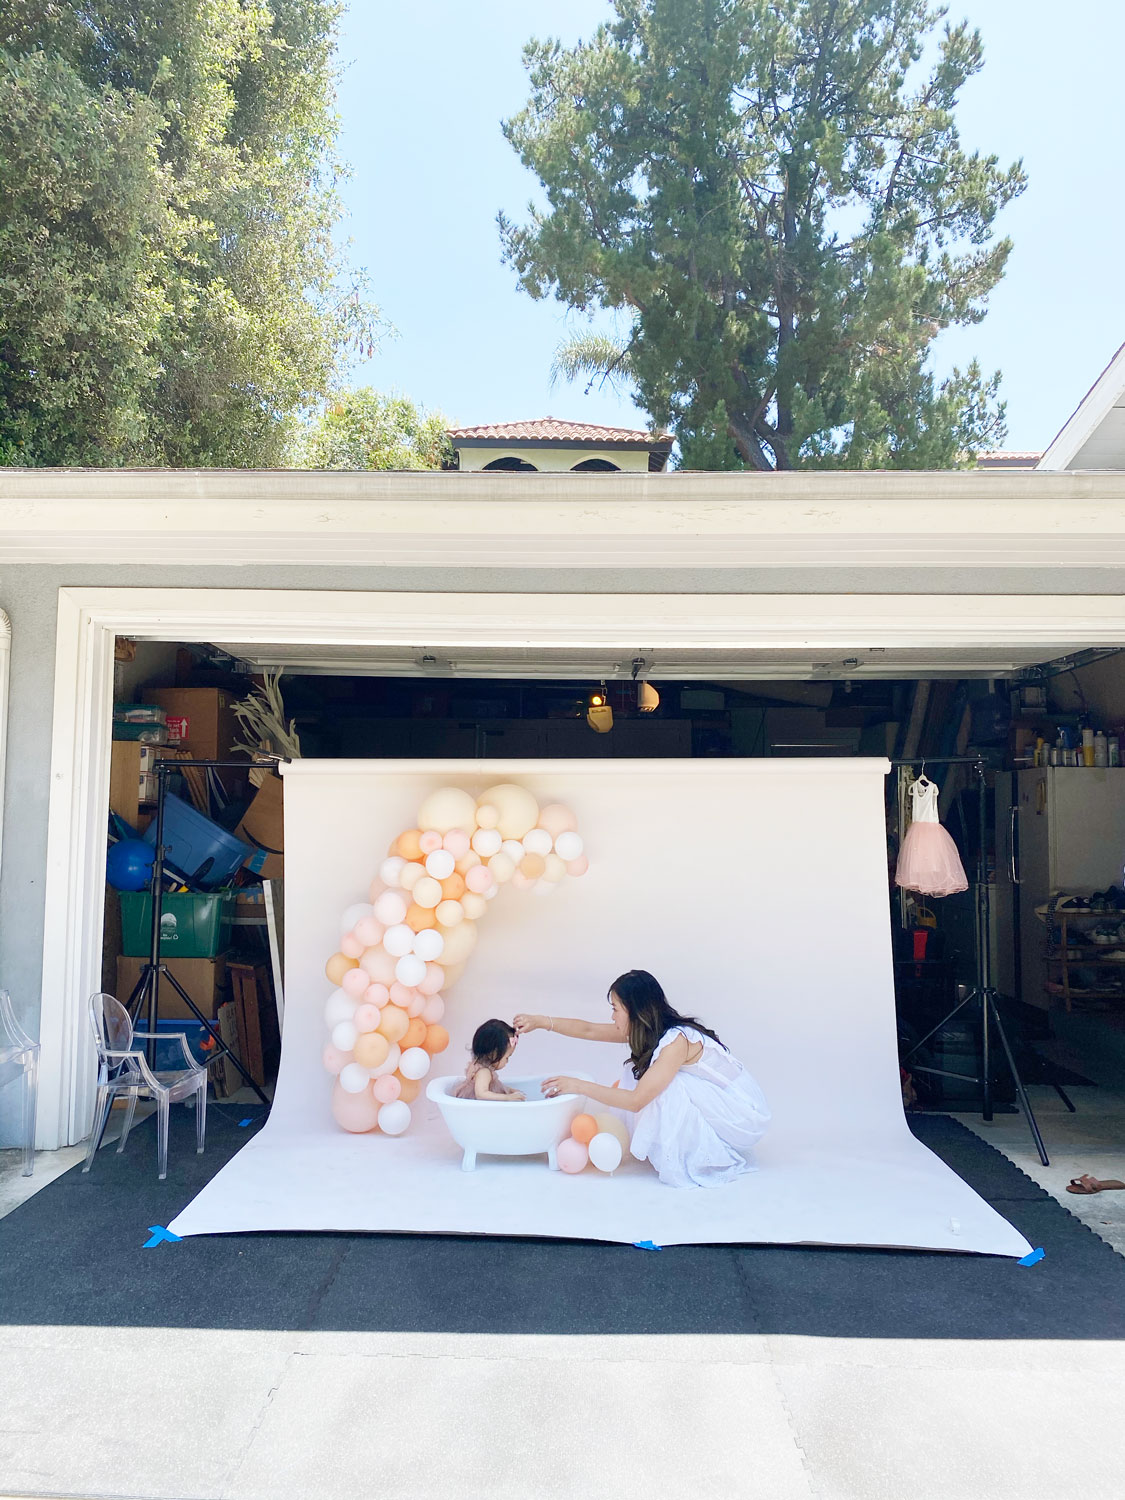 Most of my sets are now available for outdoor studio photography for children! These sets are set up in my driveway, allowing us to achieve the indoor studio look with the safety of being outdoors...and staying 6 feet apart! I like to call them garage sessions... #outdoorphotography